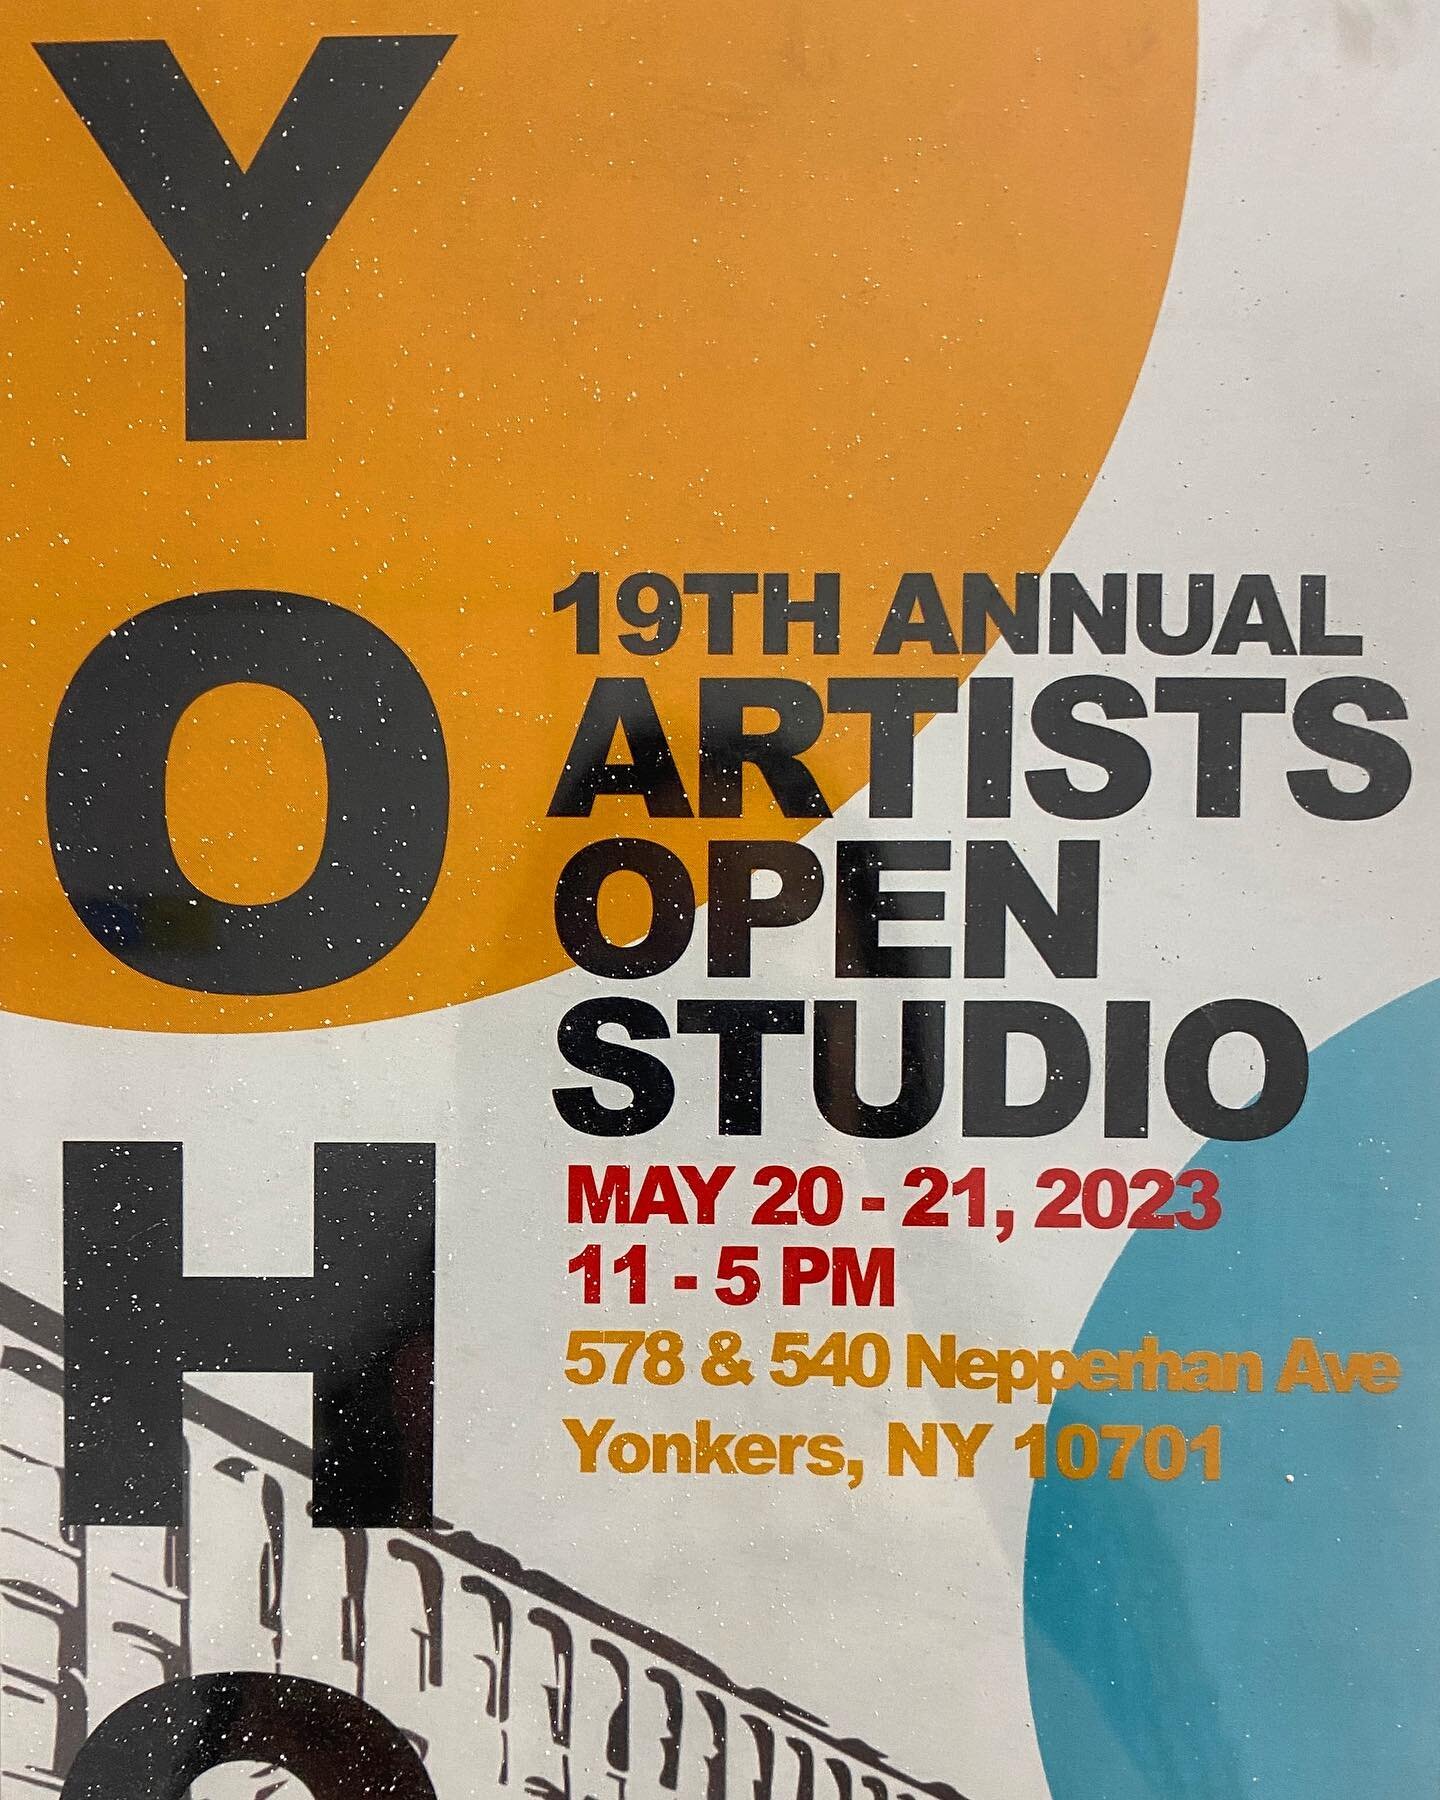 Hi friends, I&rsquo;ve moved studios and am now part of this amazing artist community in Yonkers! @yohoopenstudios Come visit May 20-21, I&rsquo;ll be there 12-5(Sat) and 11-5 (Sun) studio 507
.
.
.
.
.
#yohoartists #yohoartistsopenstudio #yonkersart